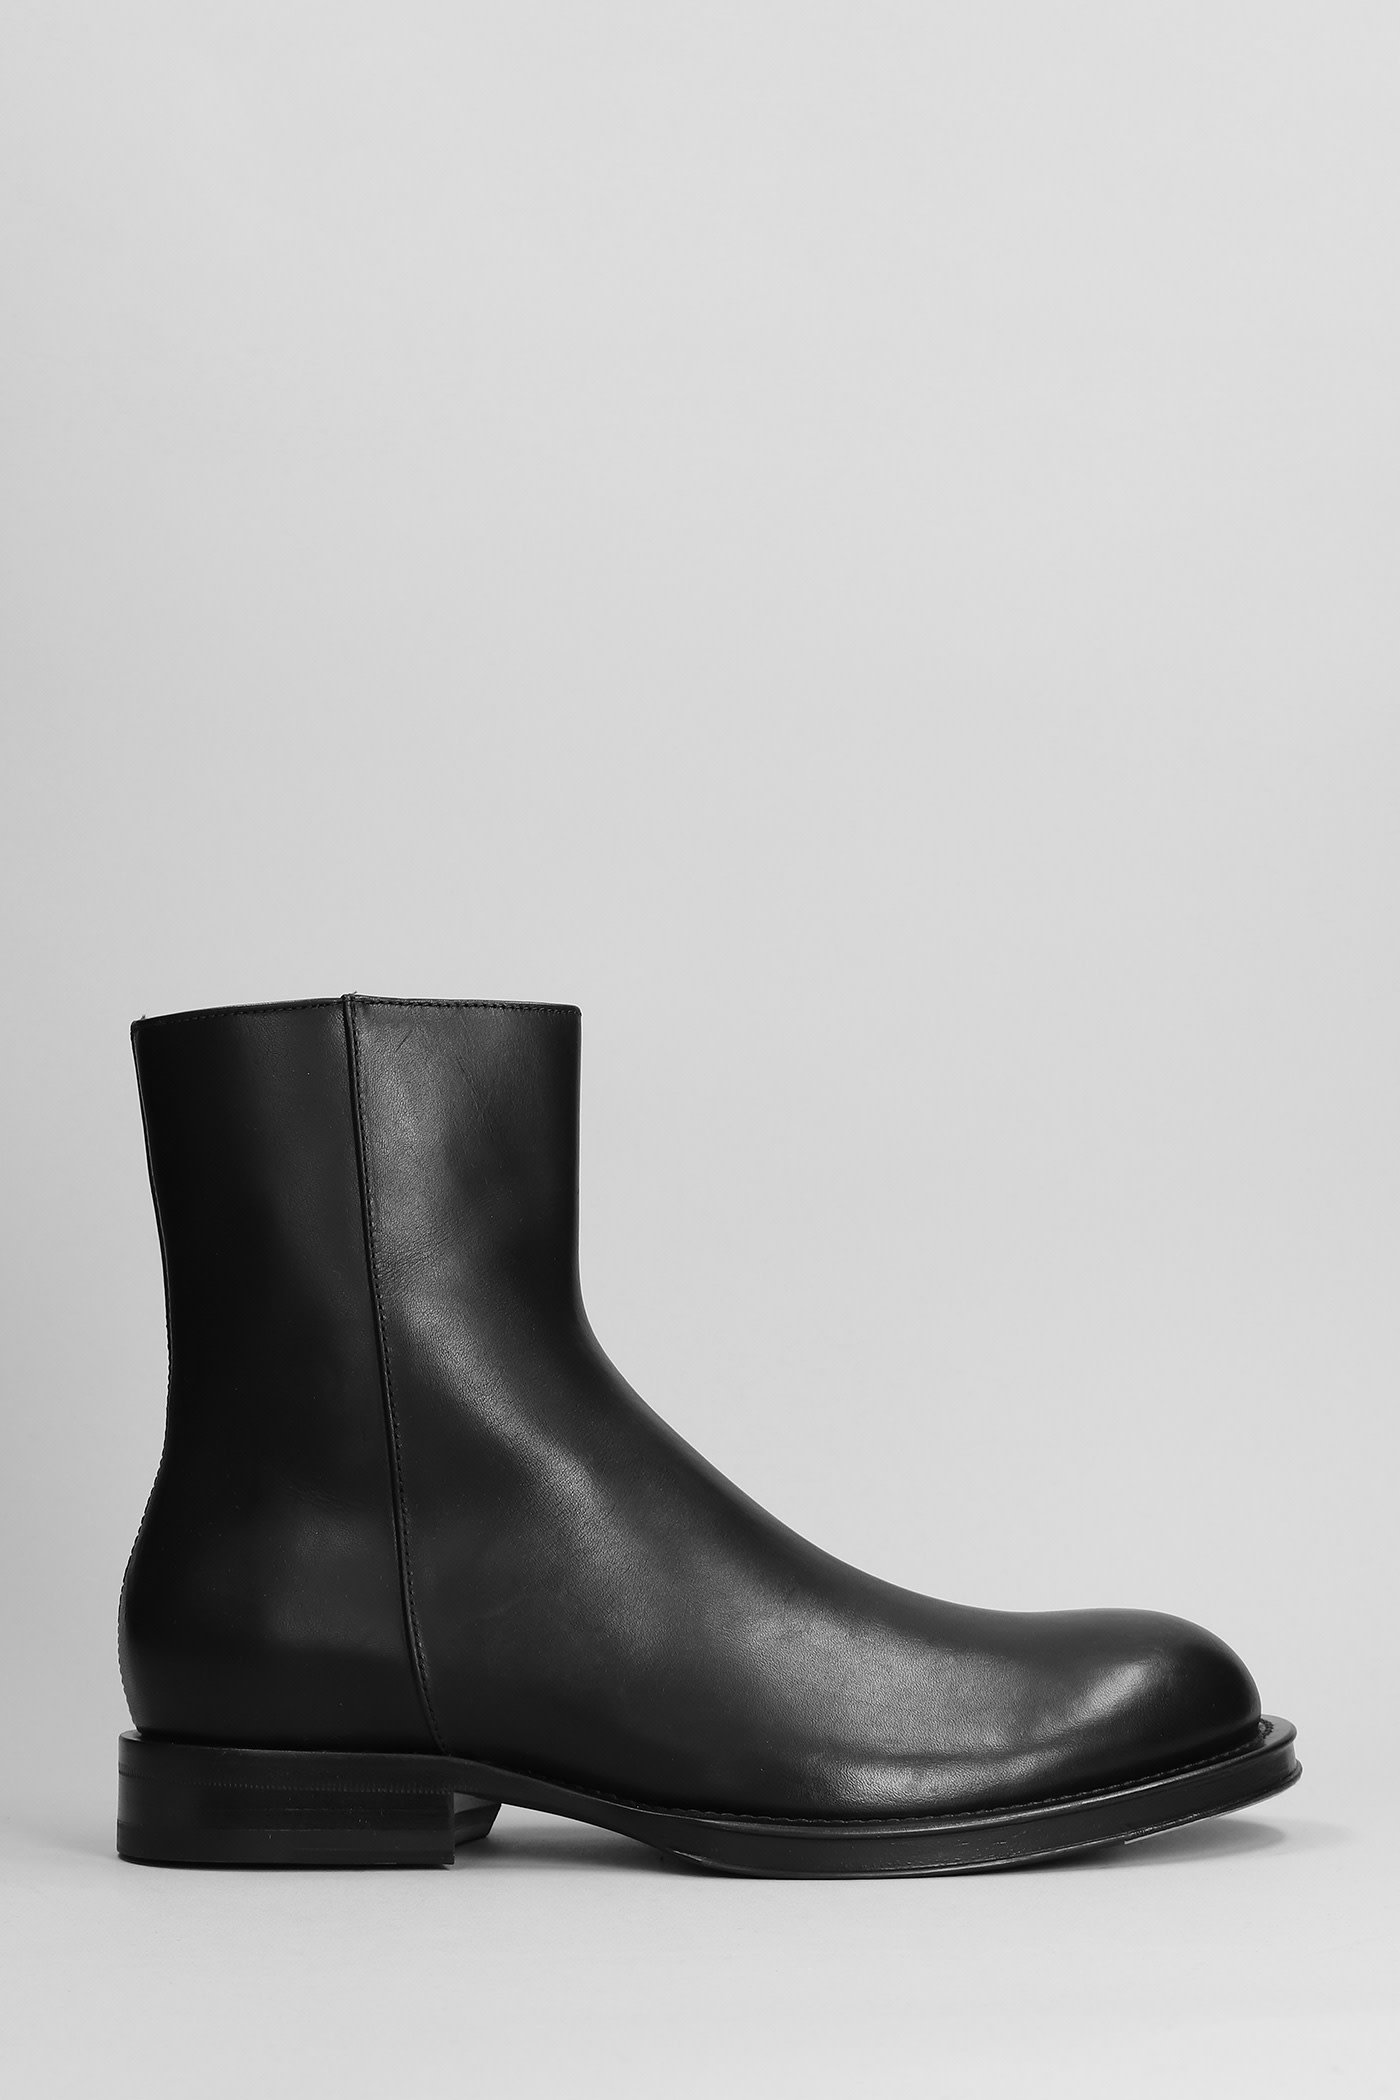 LANVIN ANKLE BOOTS IN BLACK LEATHER